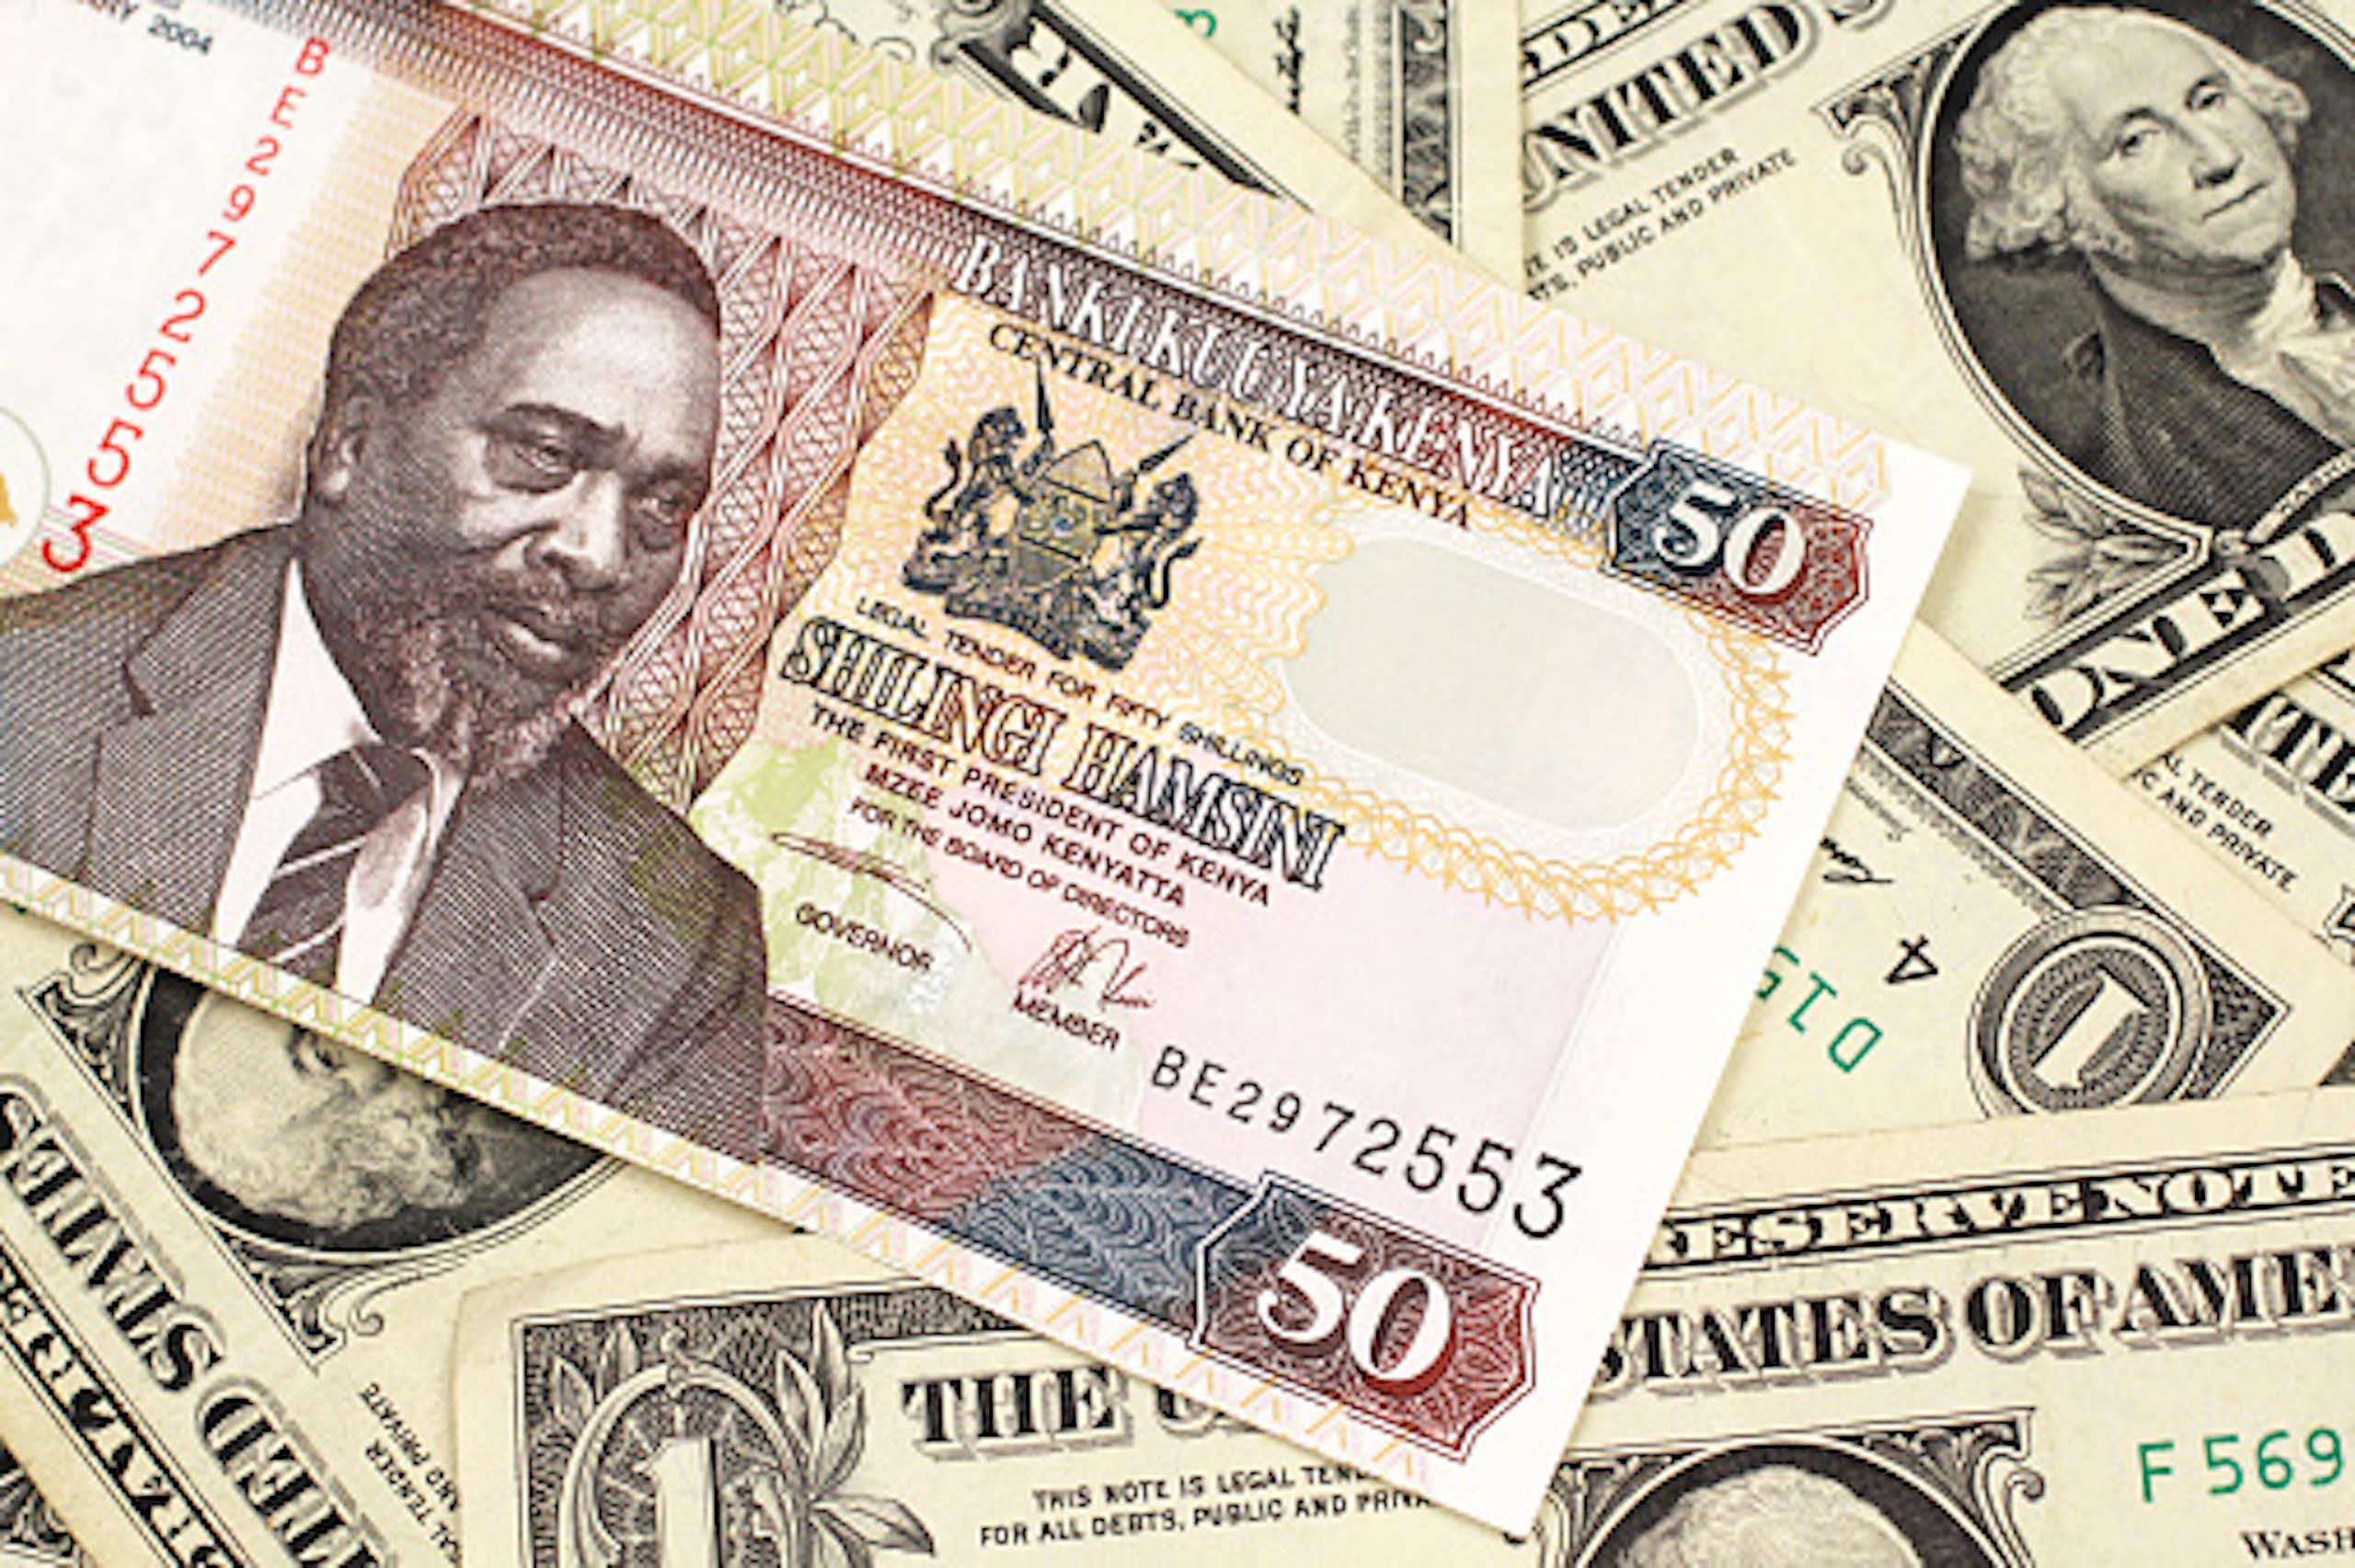 Kenya’s shilling is regaining value, but don’t expect it to last - expert